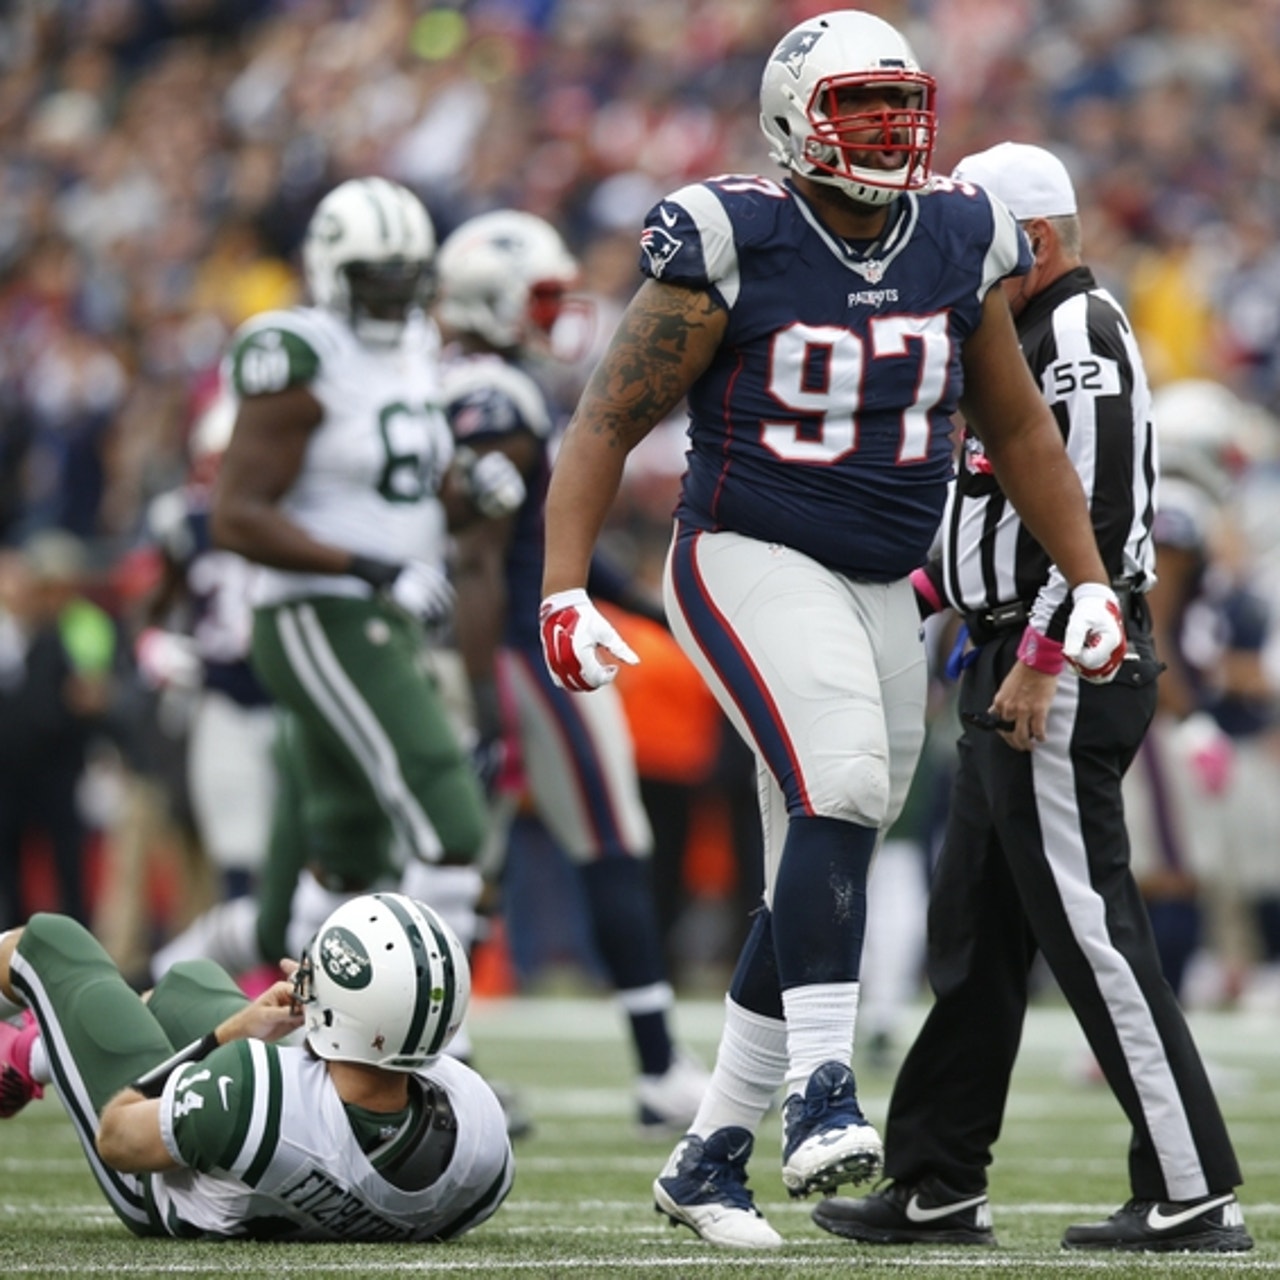 Alan Branch will be important for Patriots in Week 1